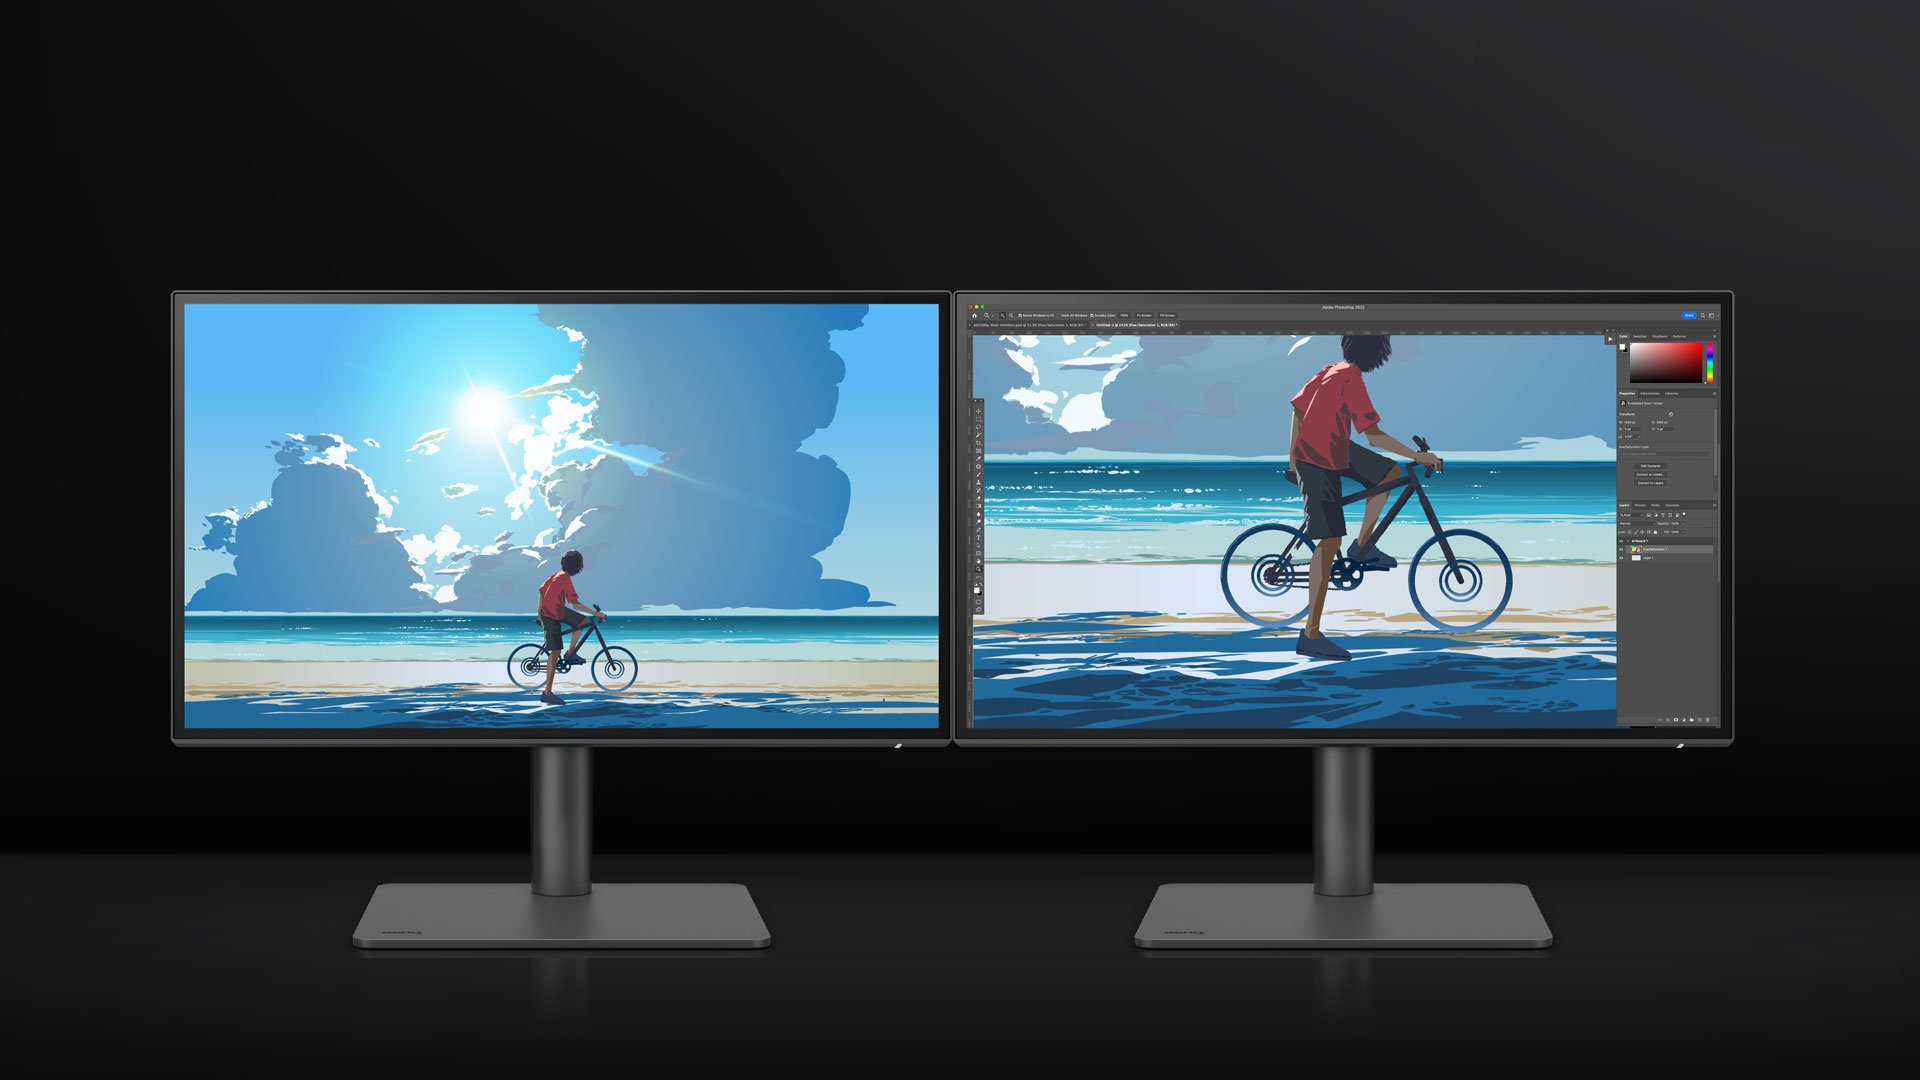 BenQ Display ColorTalk software makes it easy to sync colors across monitors with just a few clicks. Save time and effort, focus on your creativity. 